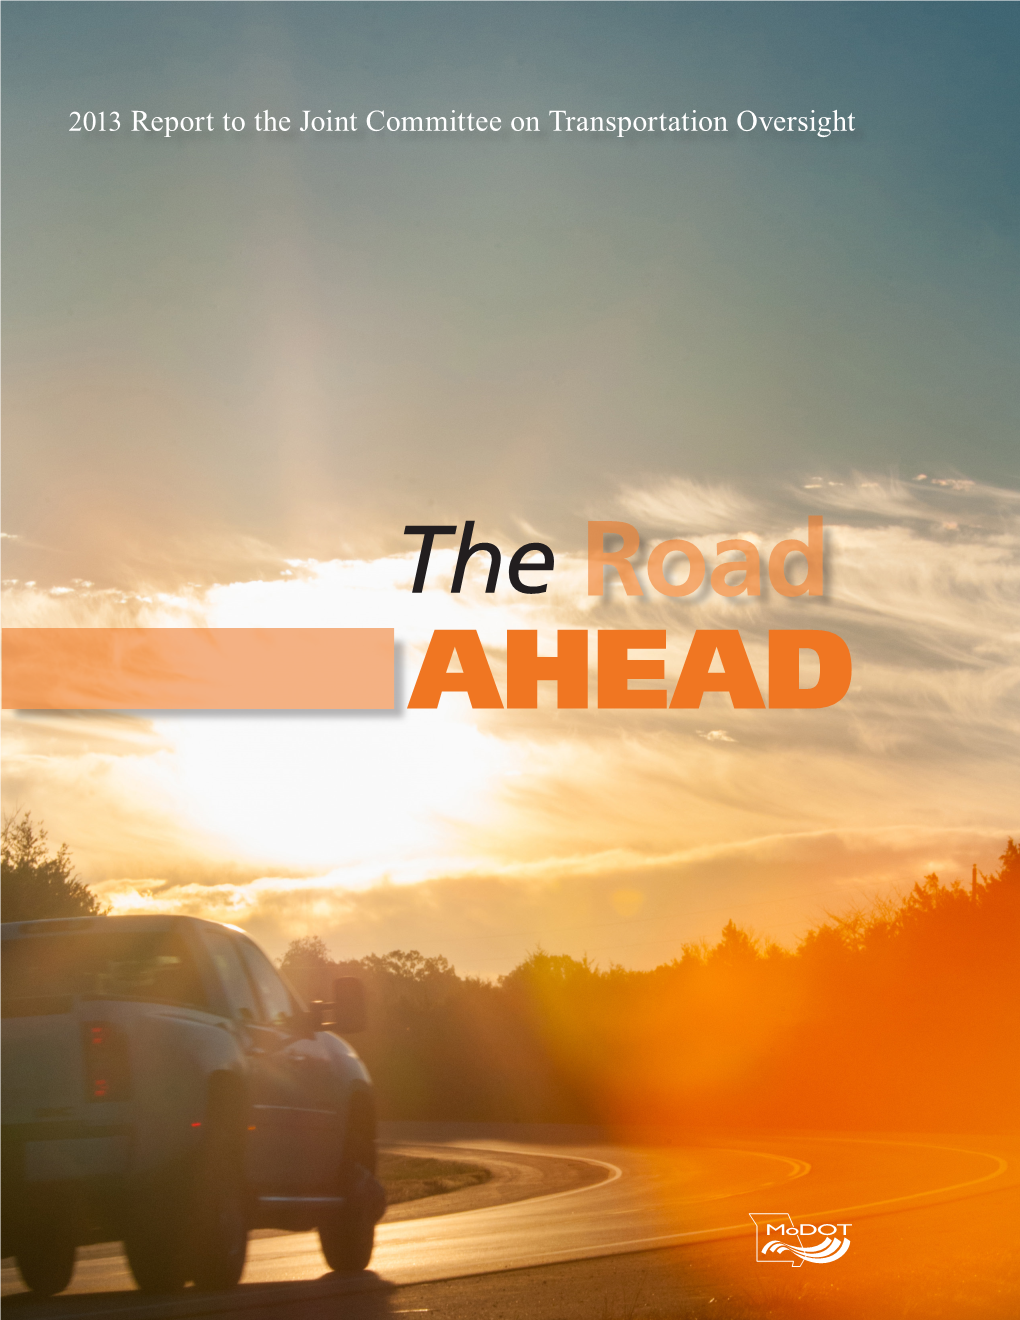 The Road AHEAD in This Report